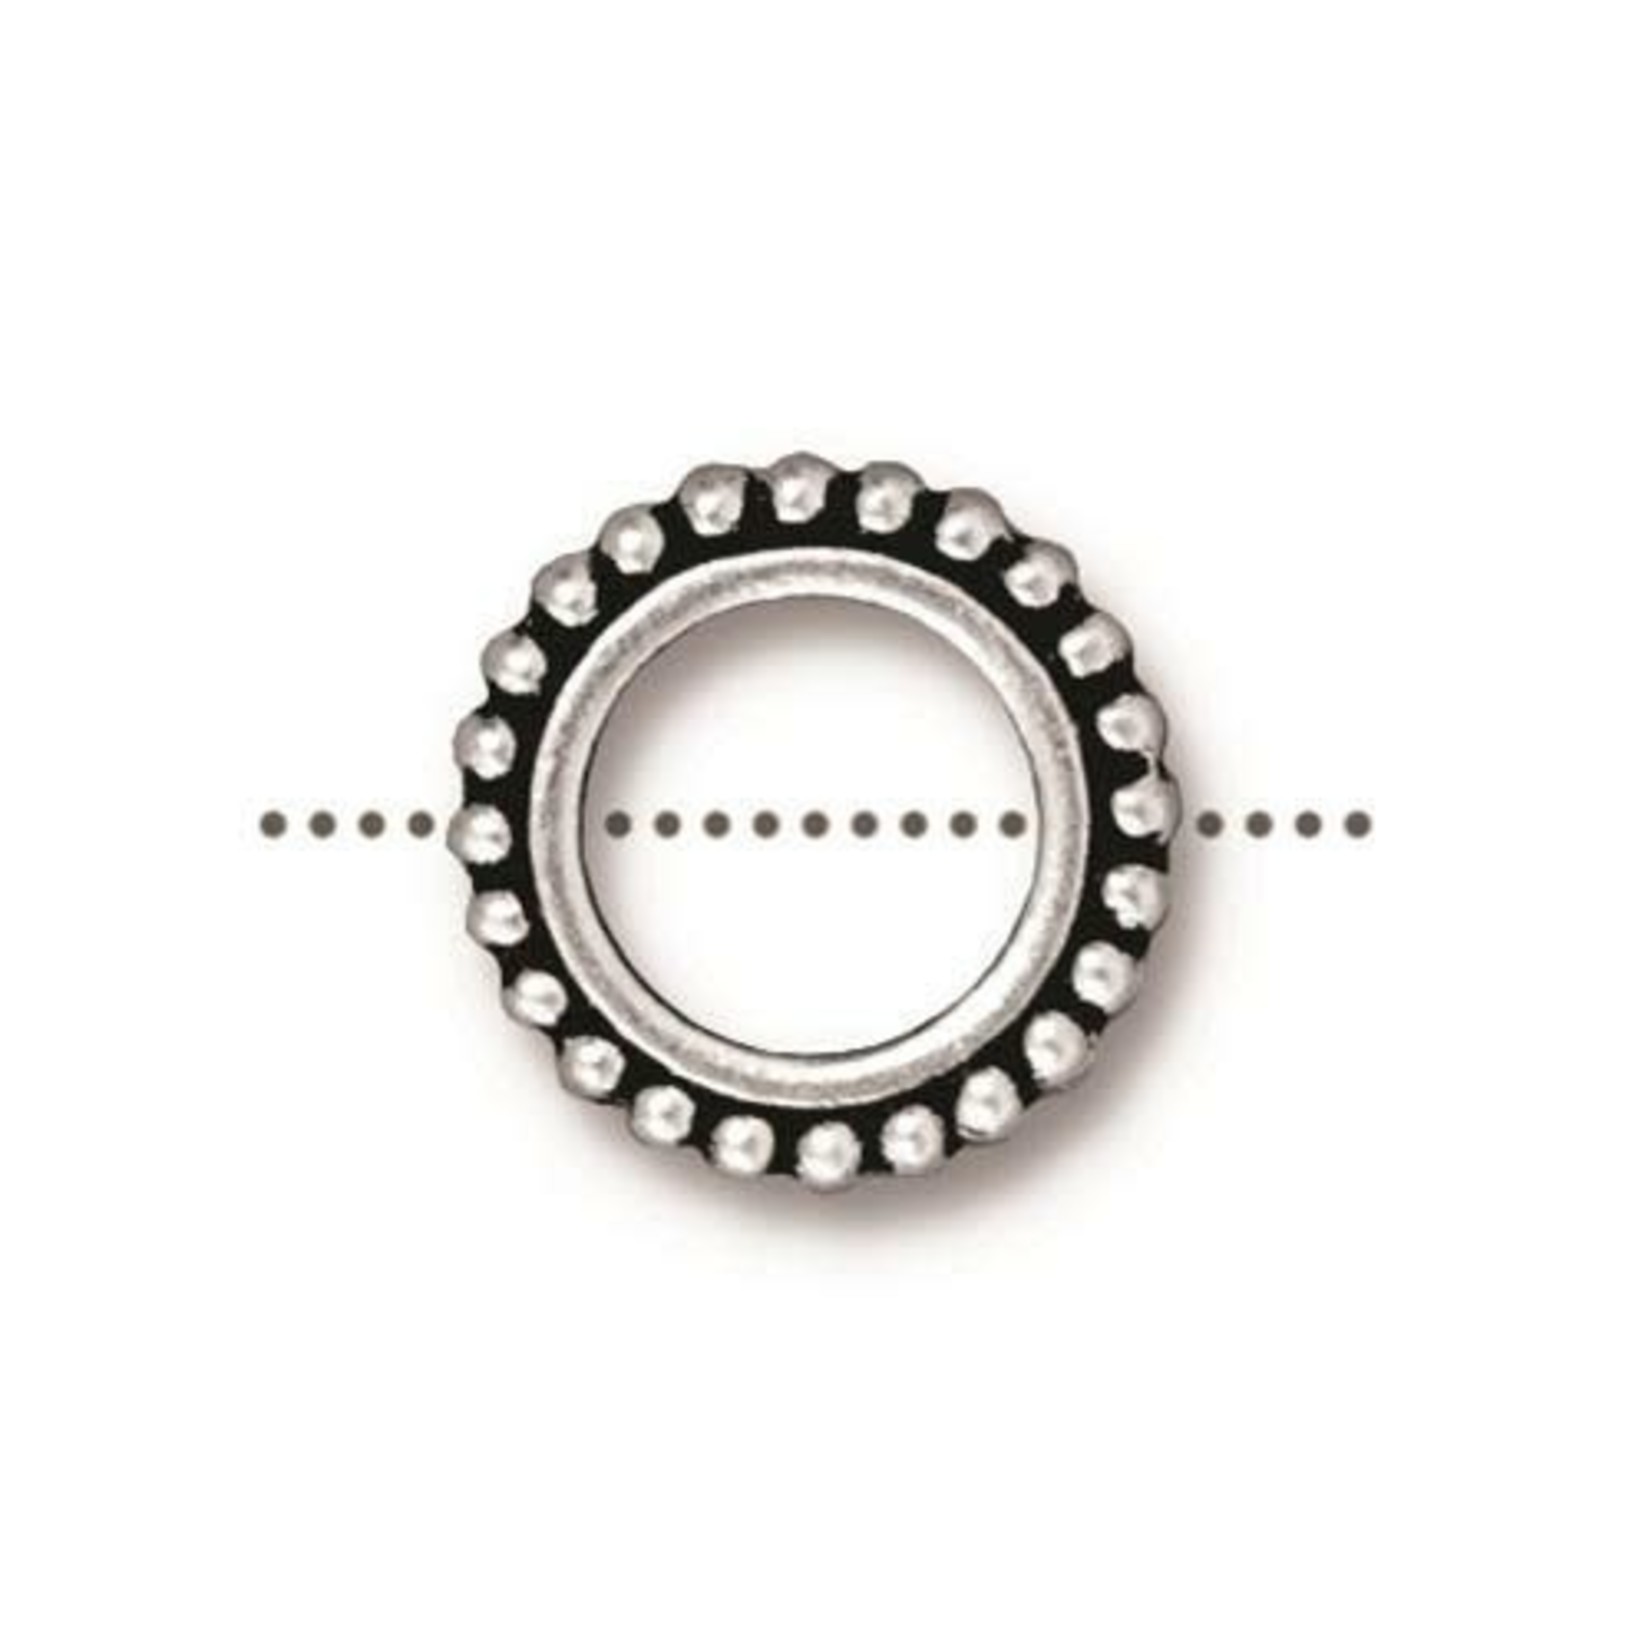 TierraCast Round 8mm Bead Frame - Antique Silver Plated